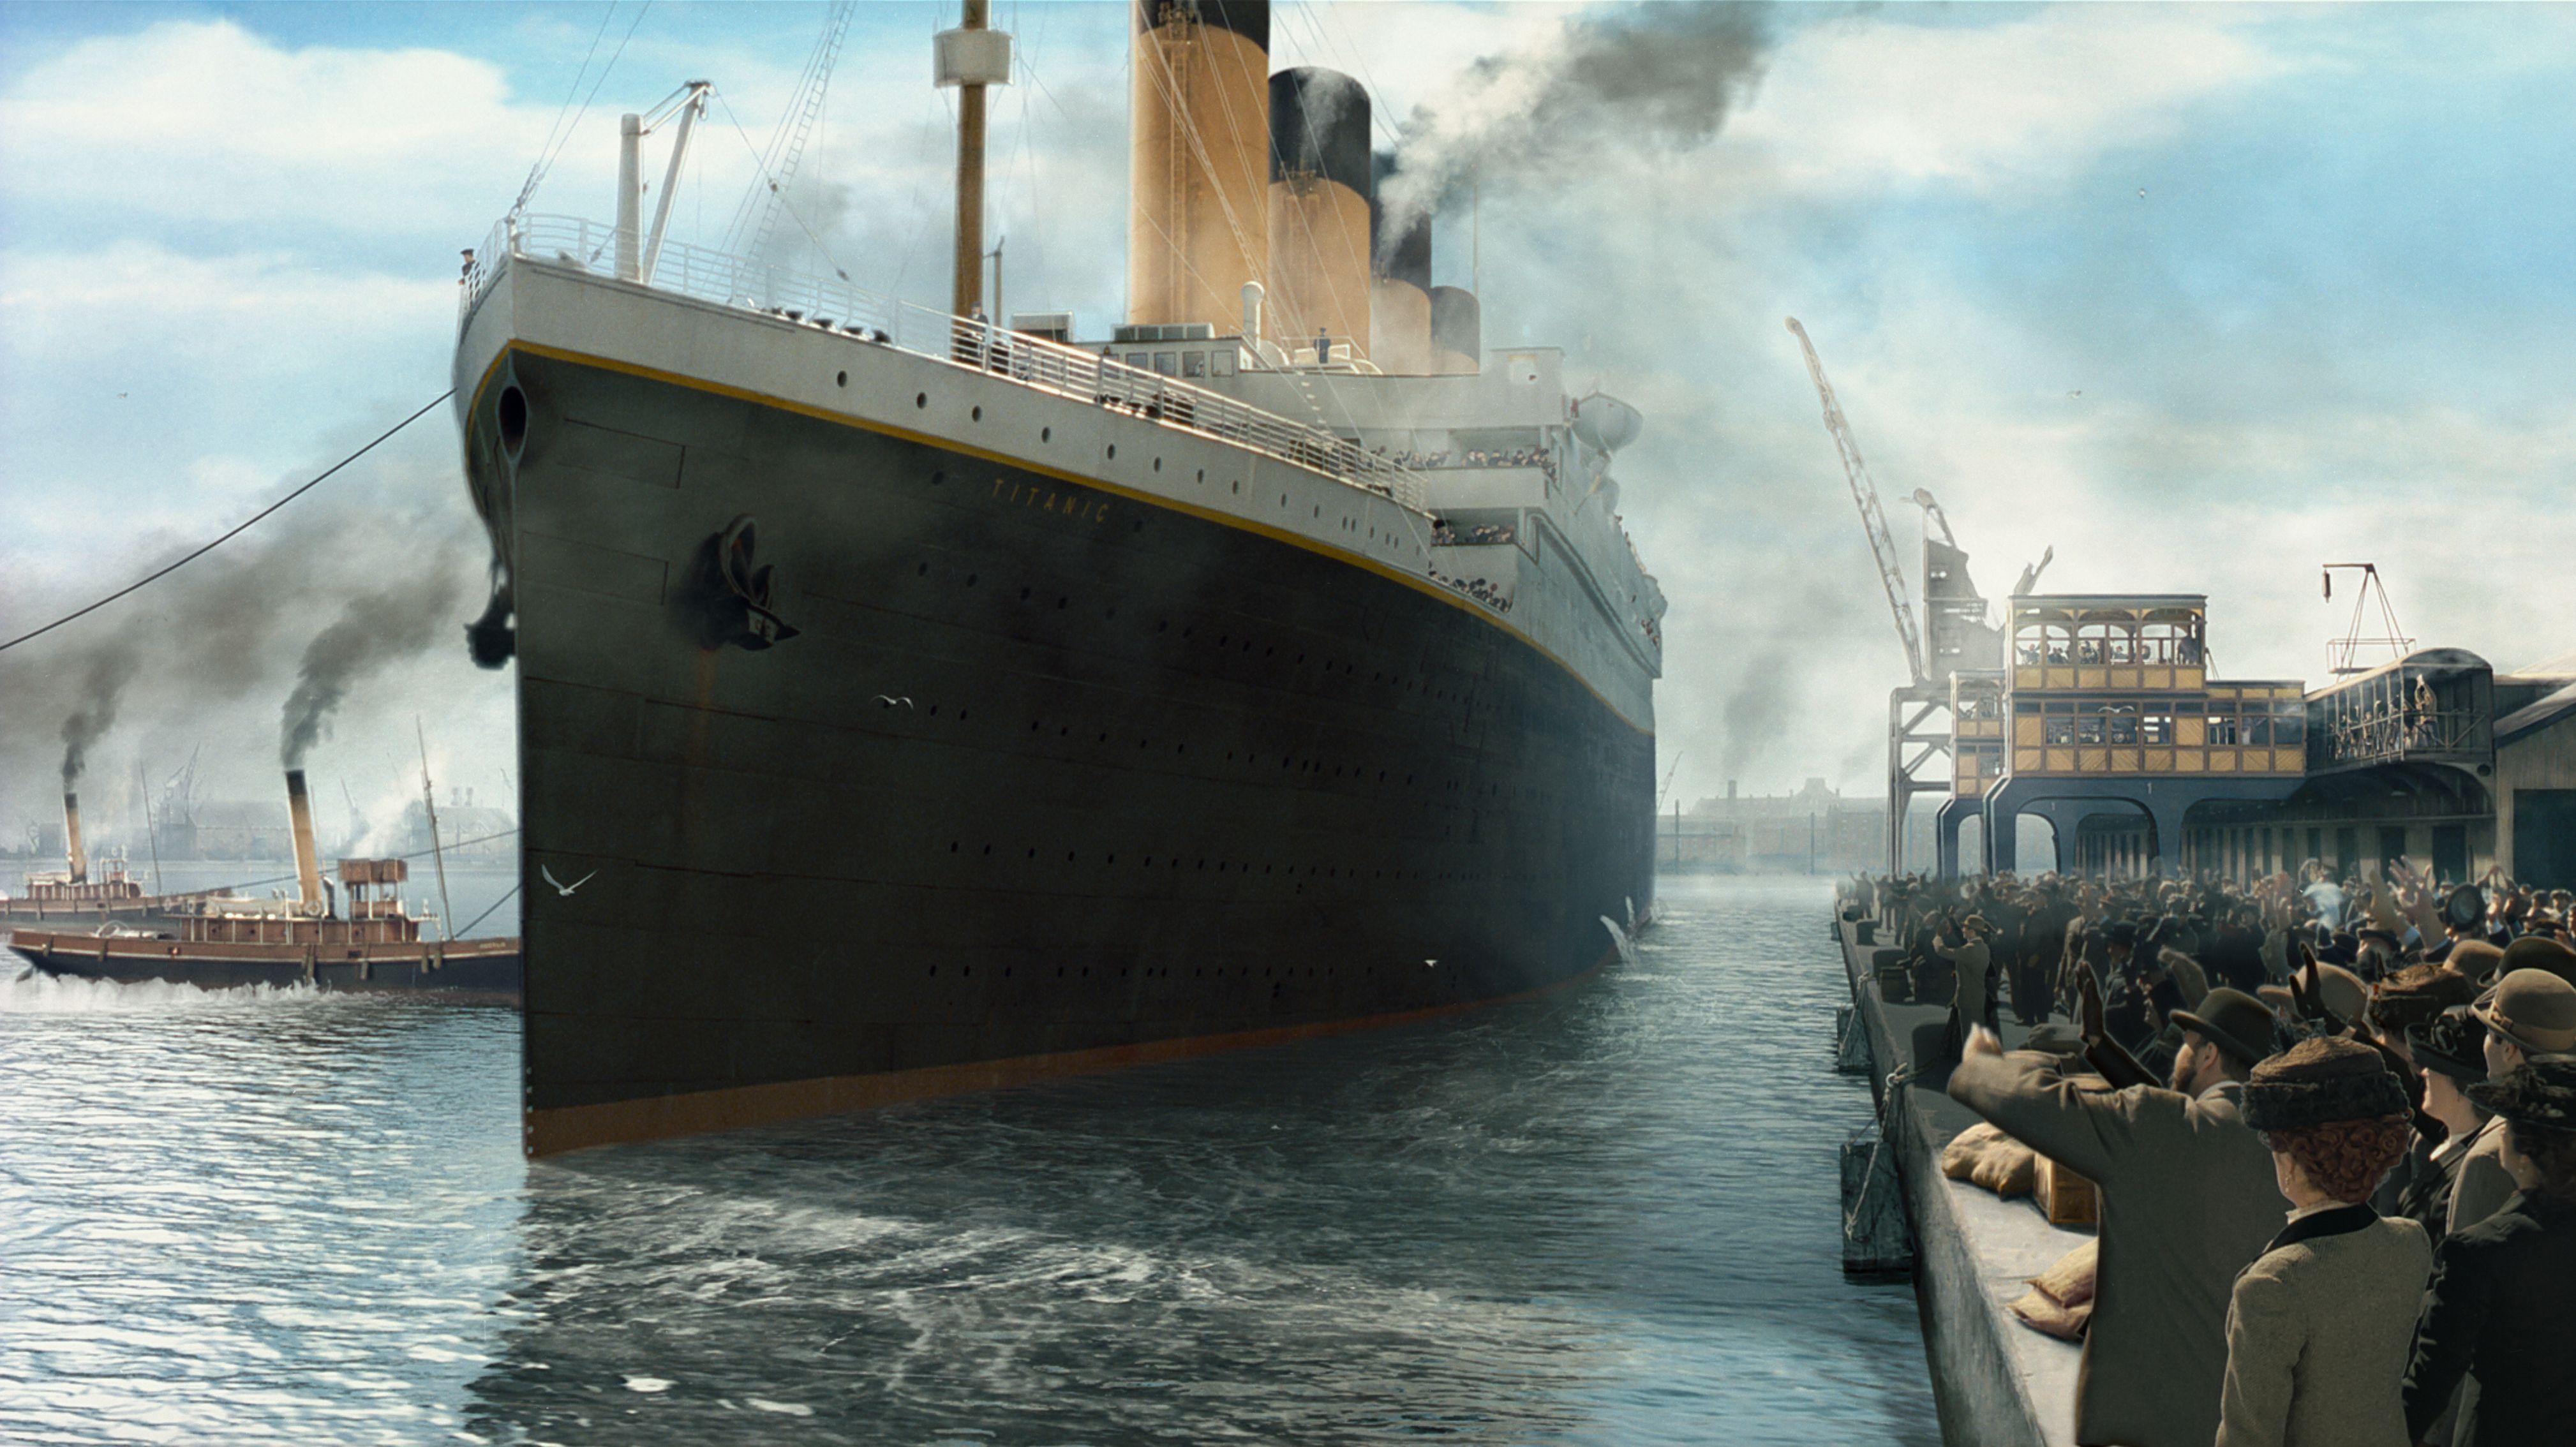 Titanic 4k Ultra HD Wallpaper and Background Imagex2268